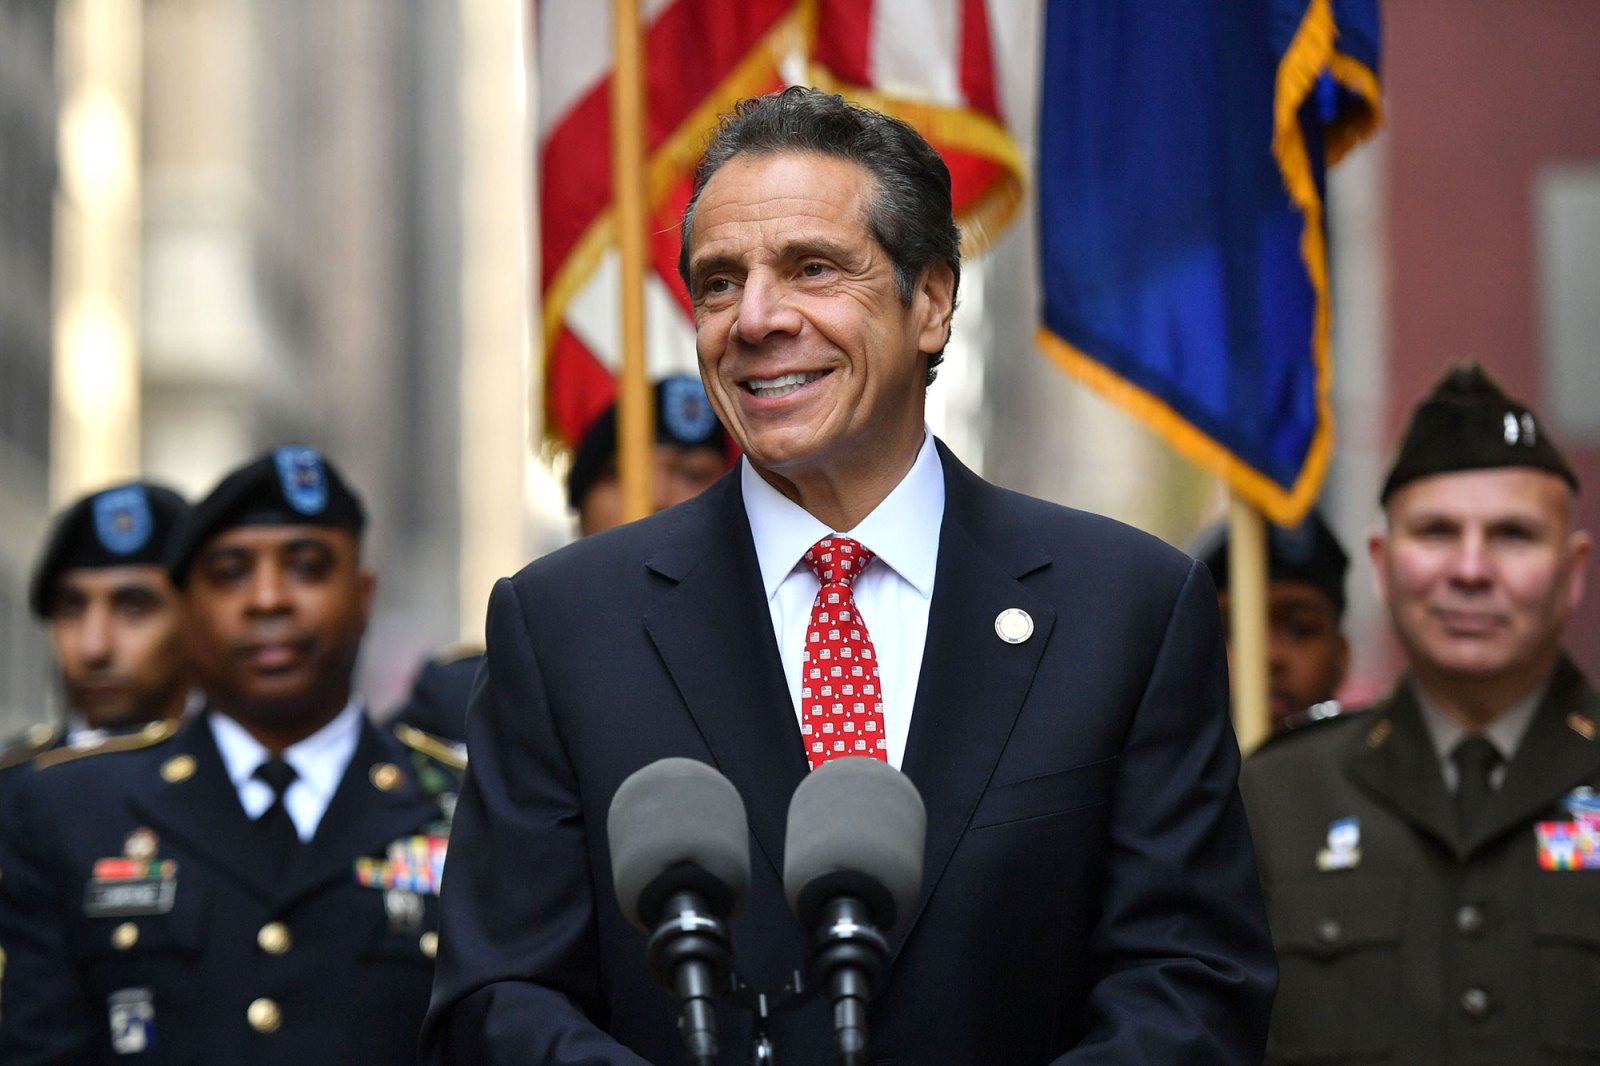 Governor of New York Andrew Cuomo Guide to Andrew Cuomo and Chris Cuomo Families Amid the Coronavirus Pandemic